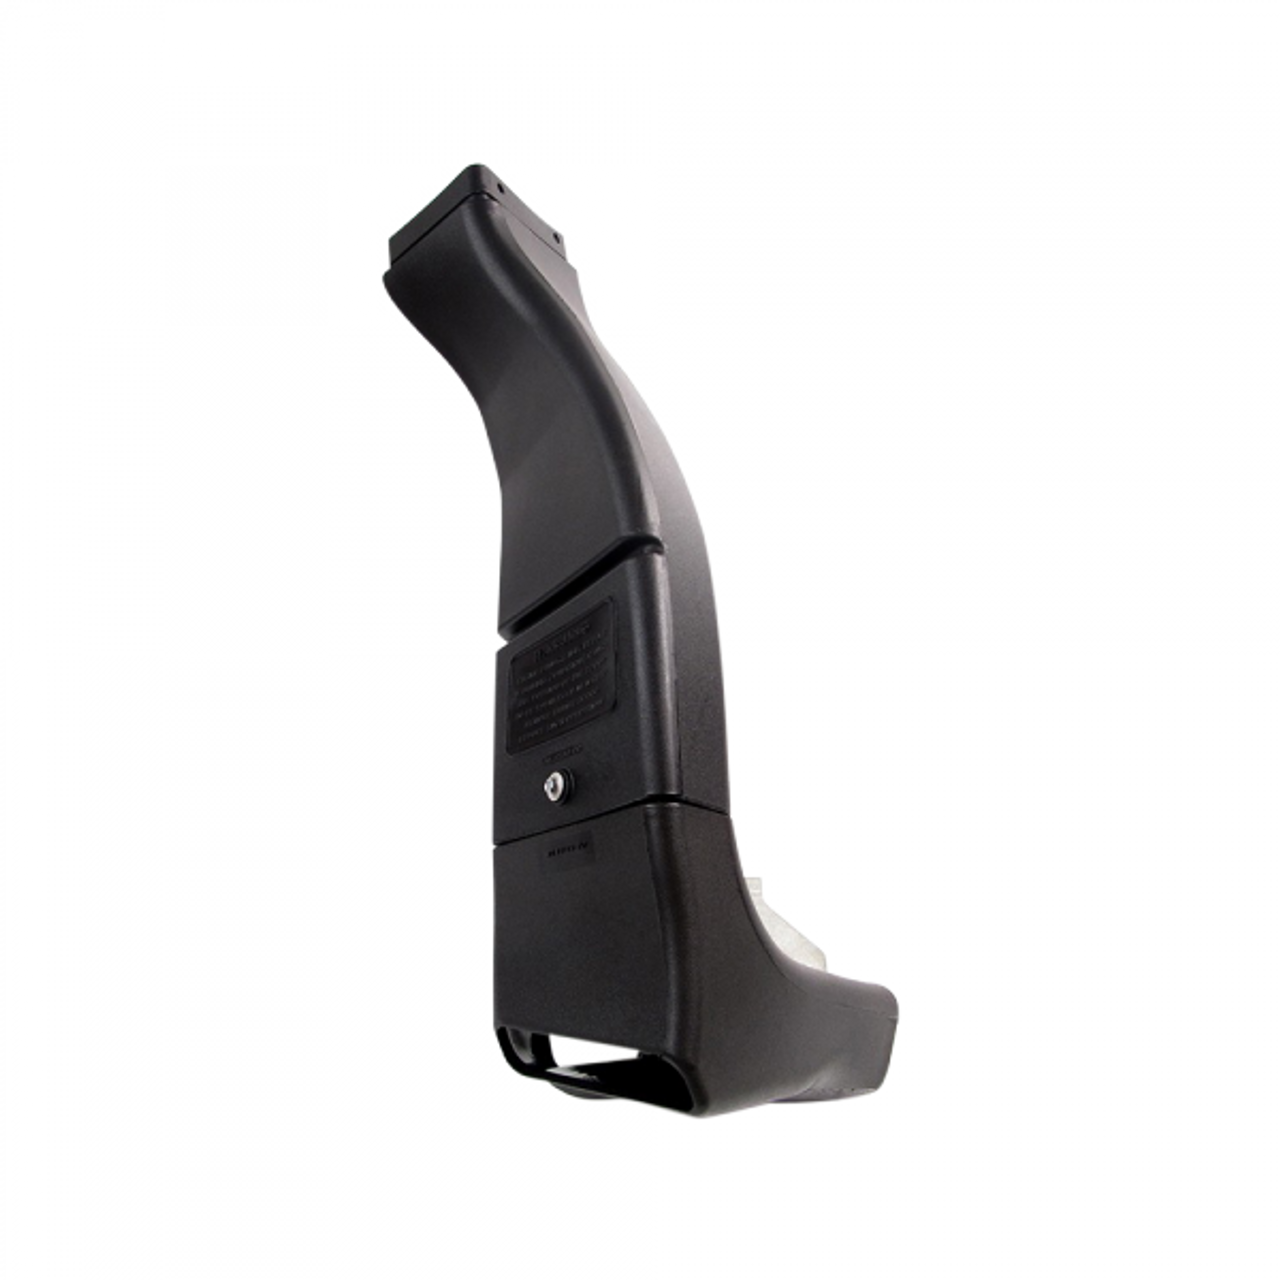 Air Scoop for S&B intakes 75-5050 & 75-5050D